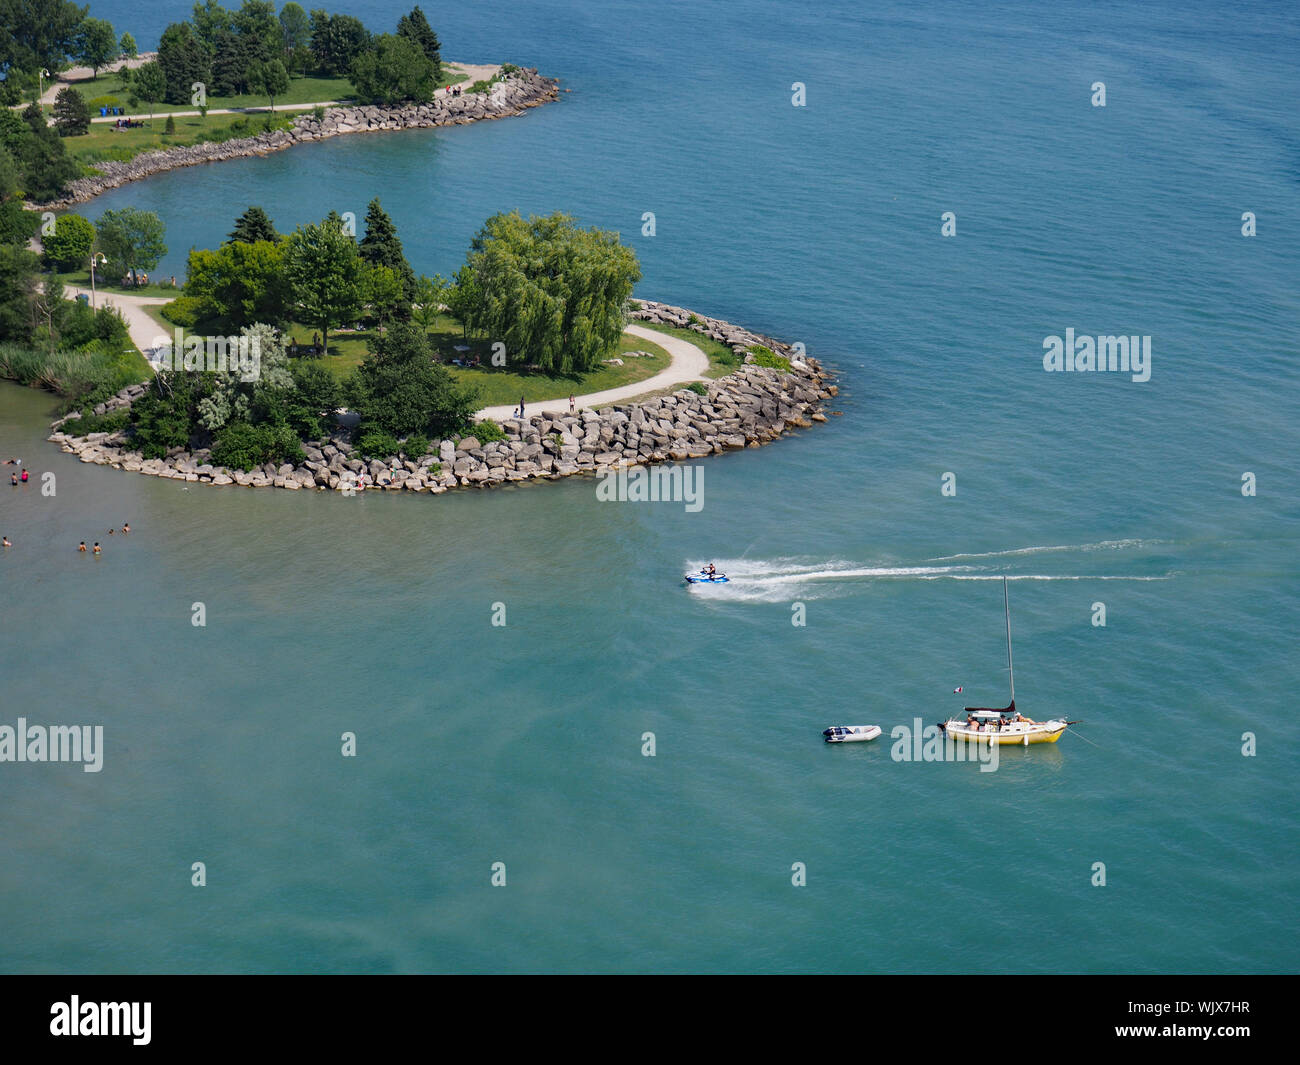 TORONTO - JULY 2018:  The shallow lagoons on the edges of Lake Ontario near the Scarborough Bluffs are popular locations for swimming and boating. Stock Photo